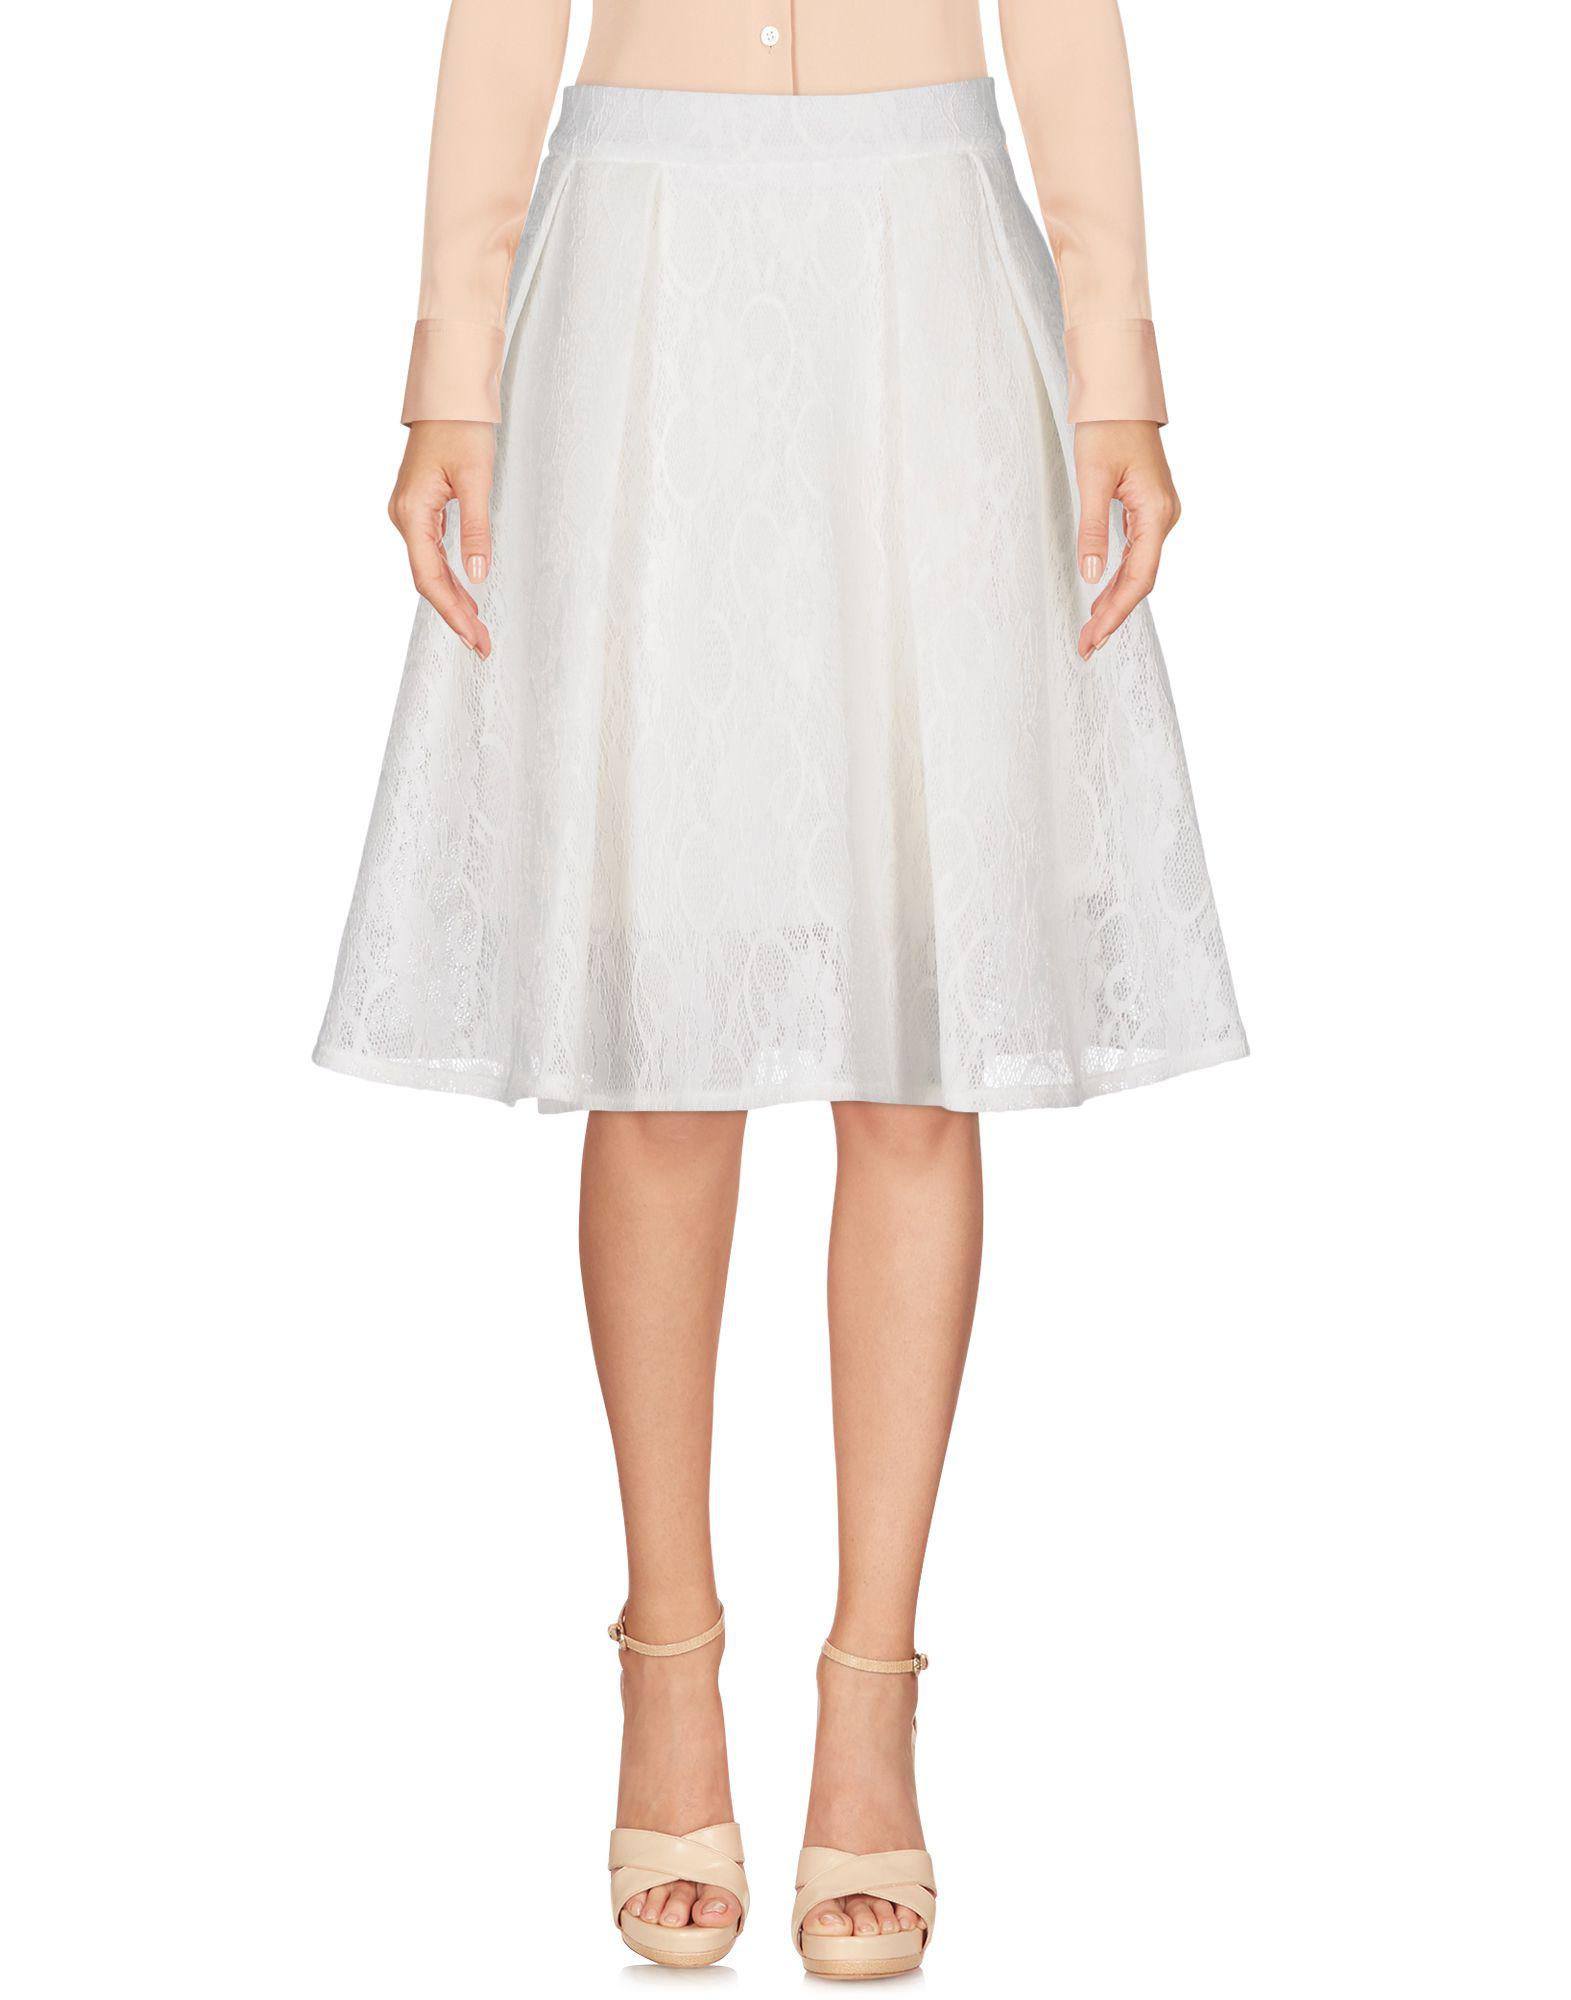 Cutie Lace Knee Length Skirt in White - Lyst